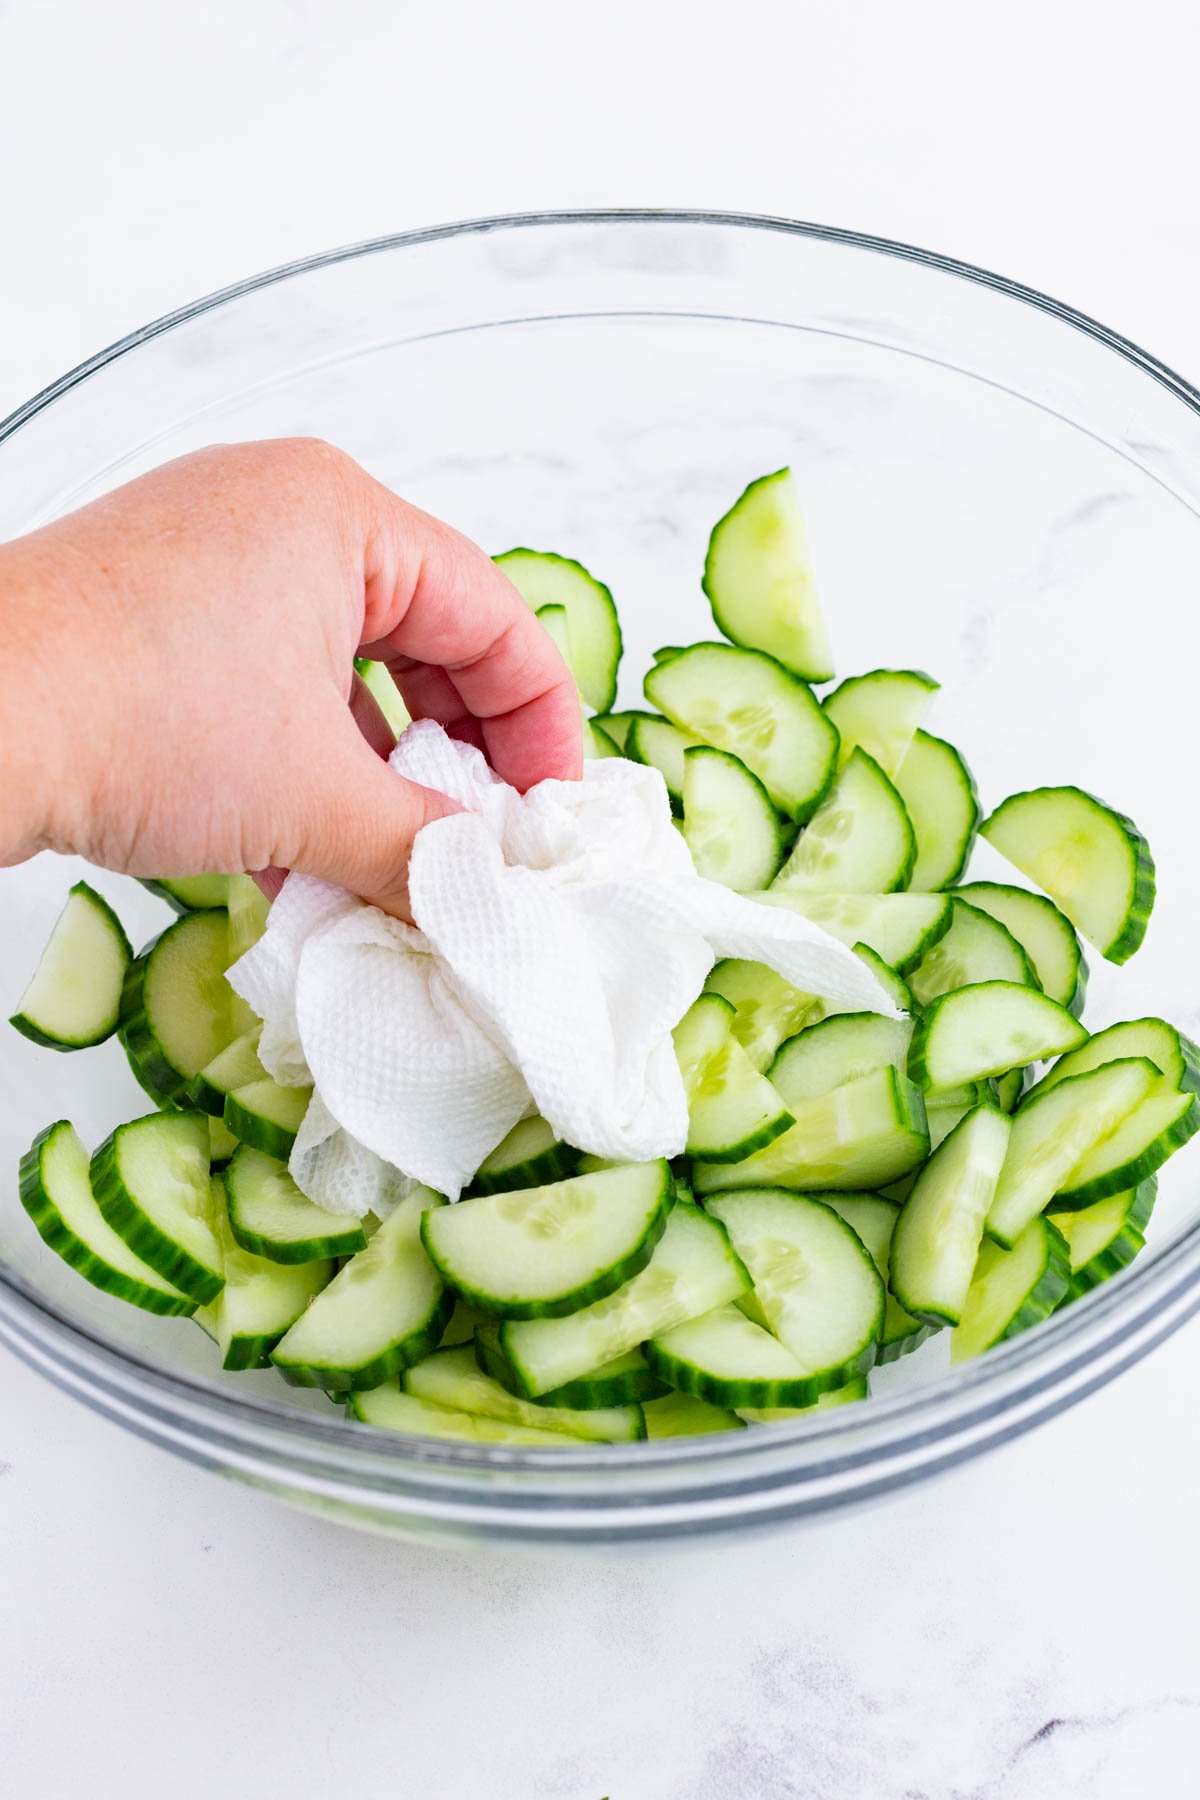 A paper towel dries excess moisture on cucumbers.